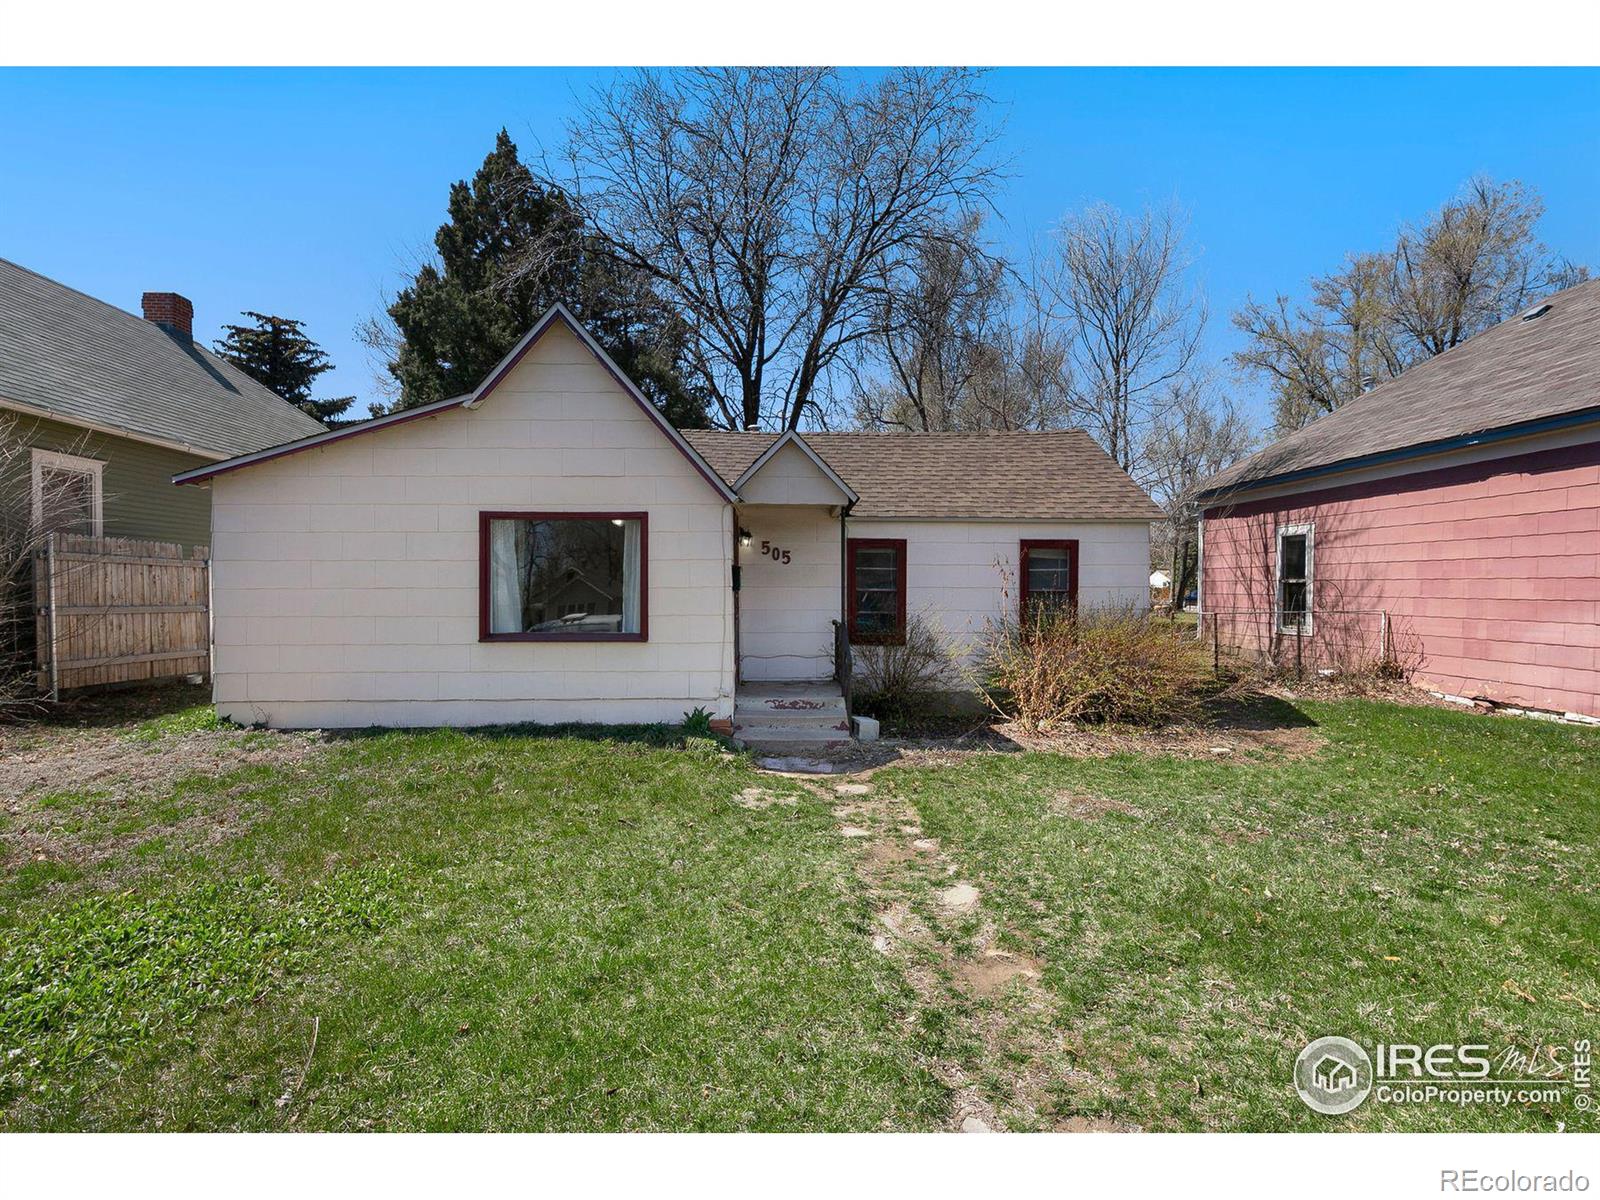 Report Image for 505  Stover Street,Fort Collins, Colorado